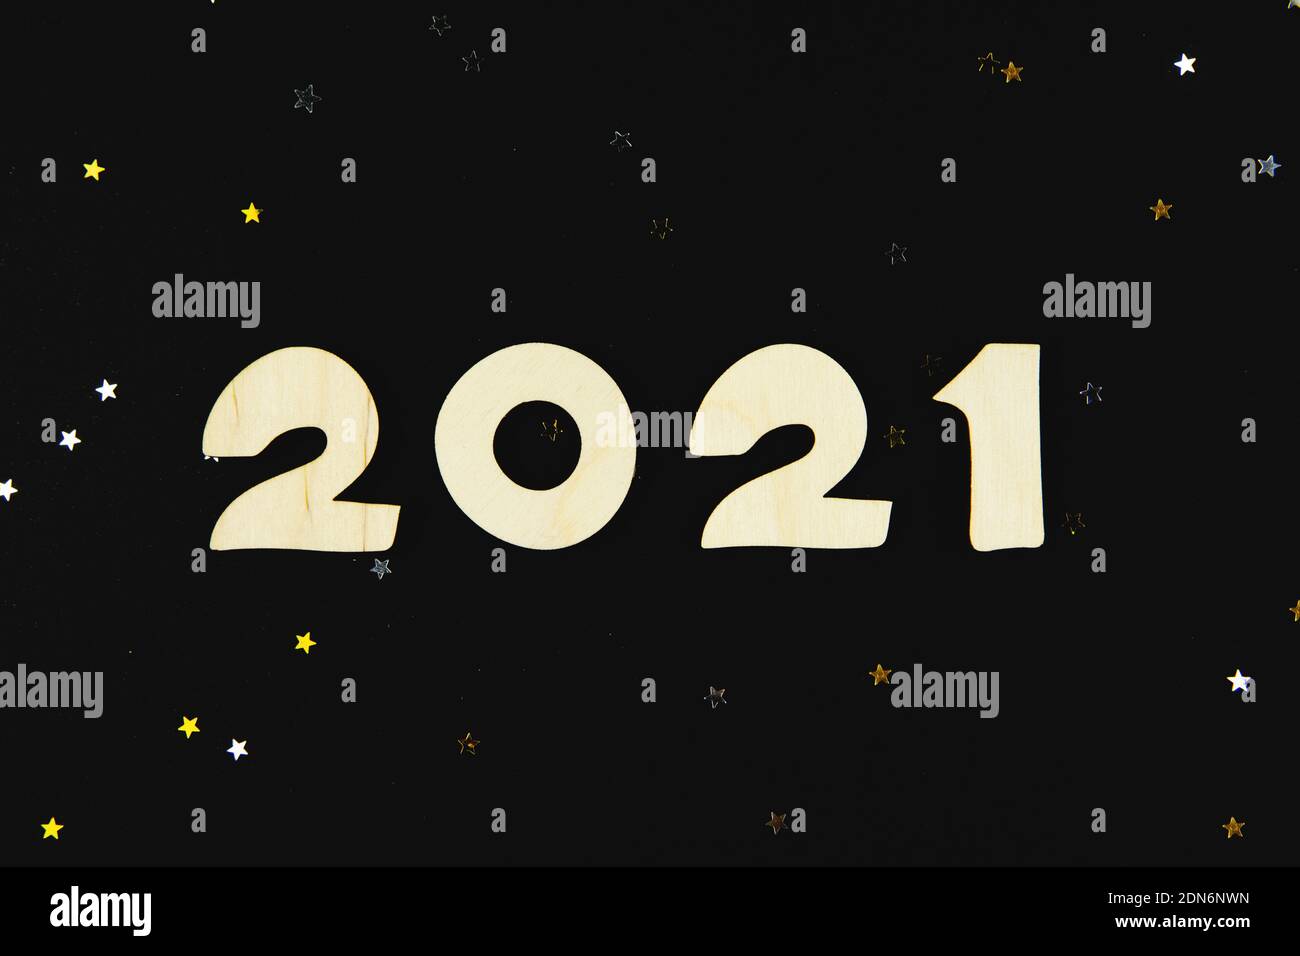 Wooden numbers 2021 on a black background with yellow and gray glitter stars. Stock Photo